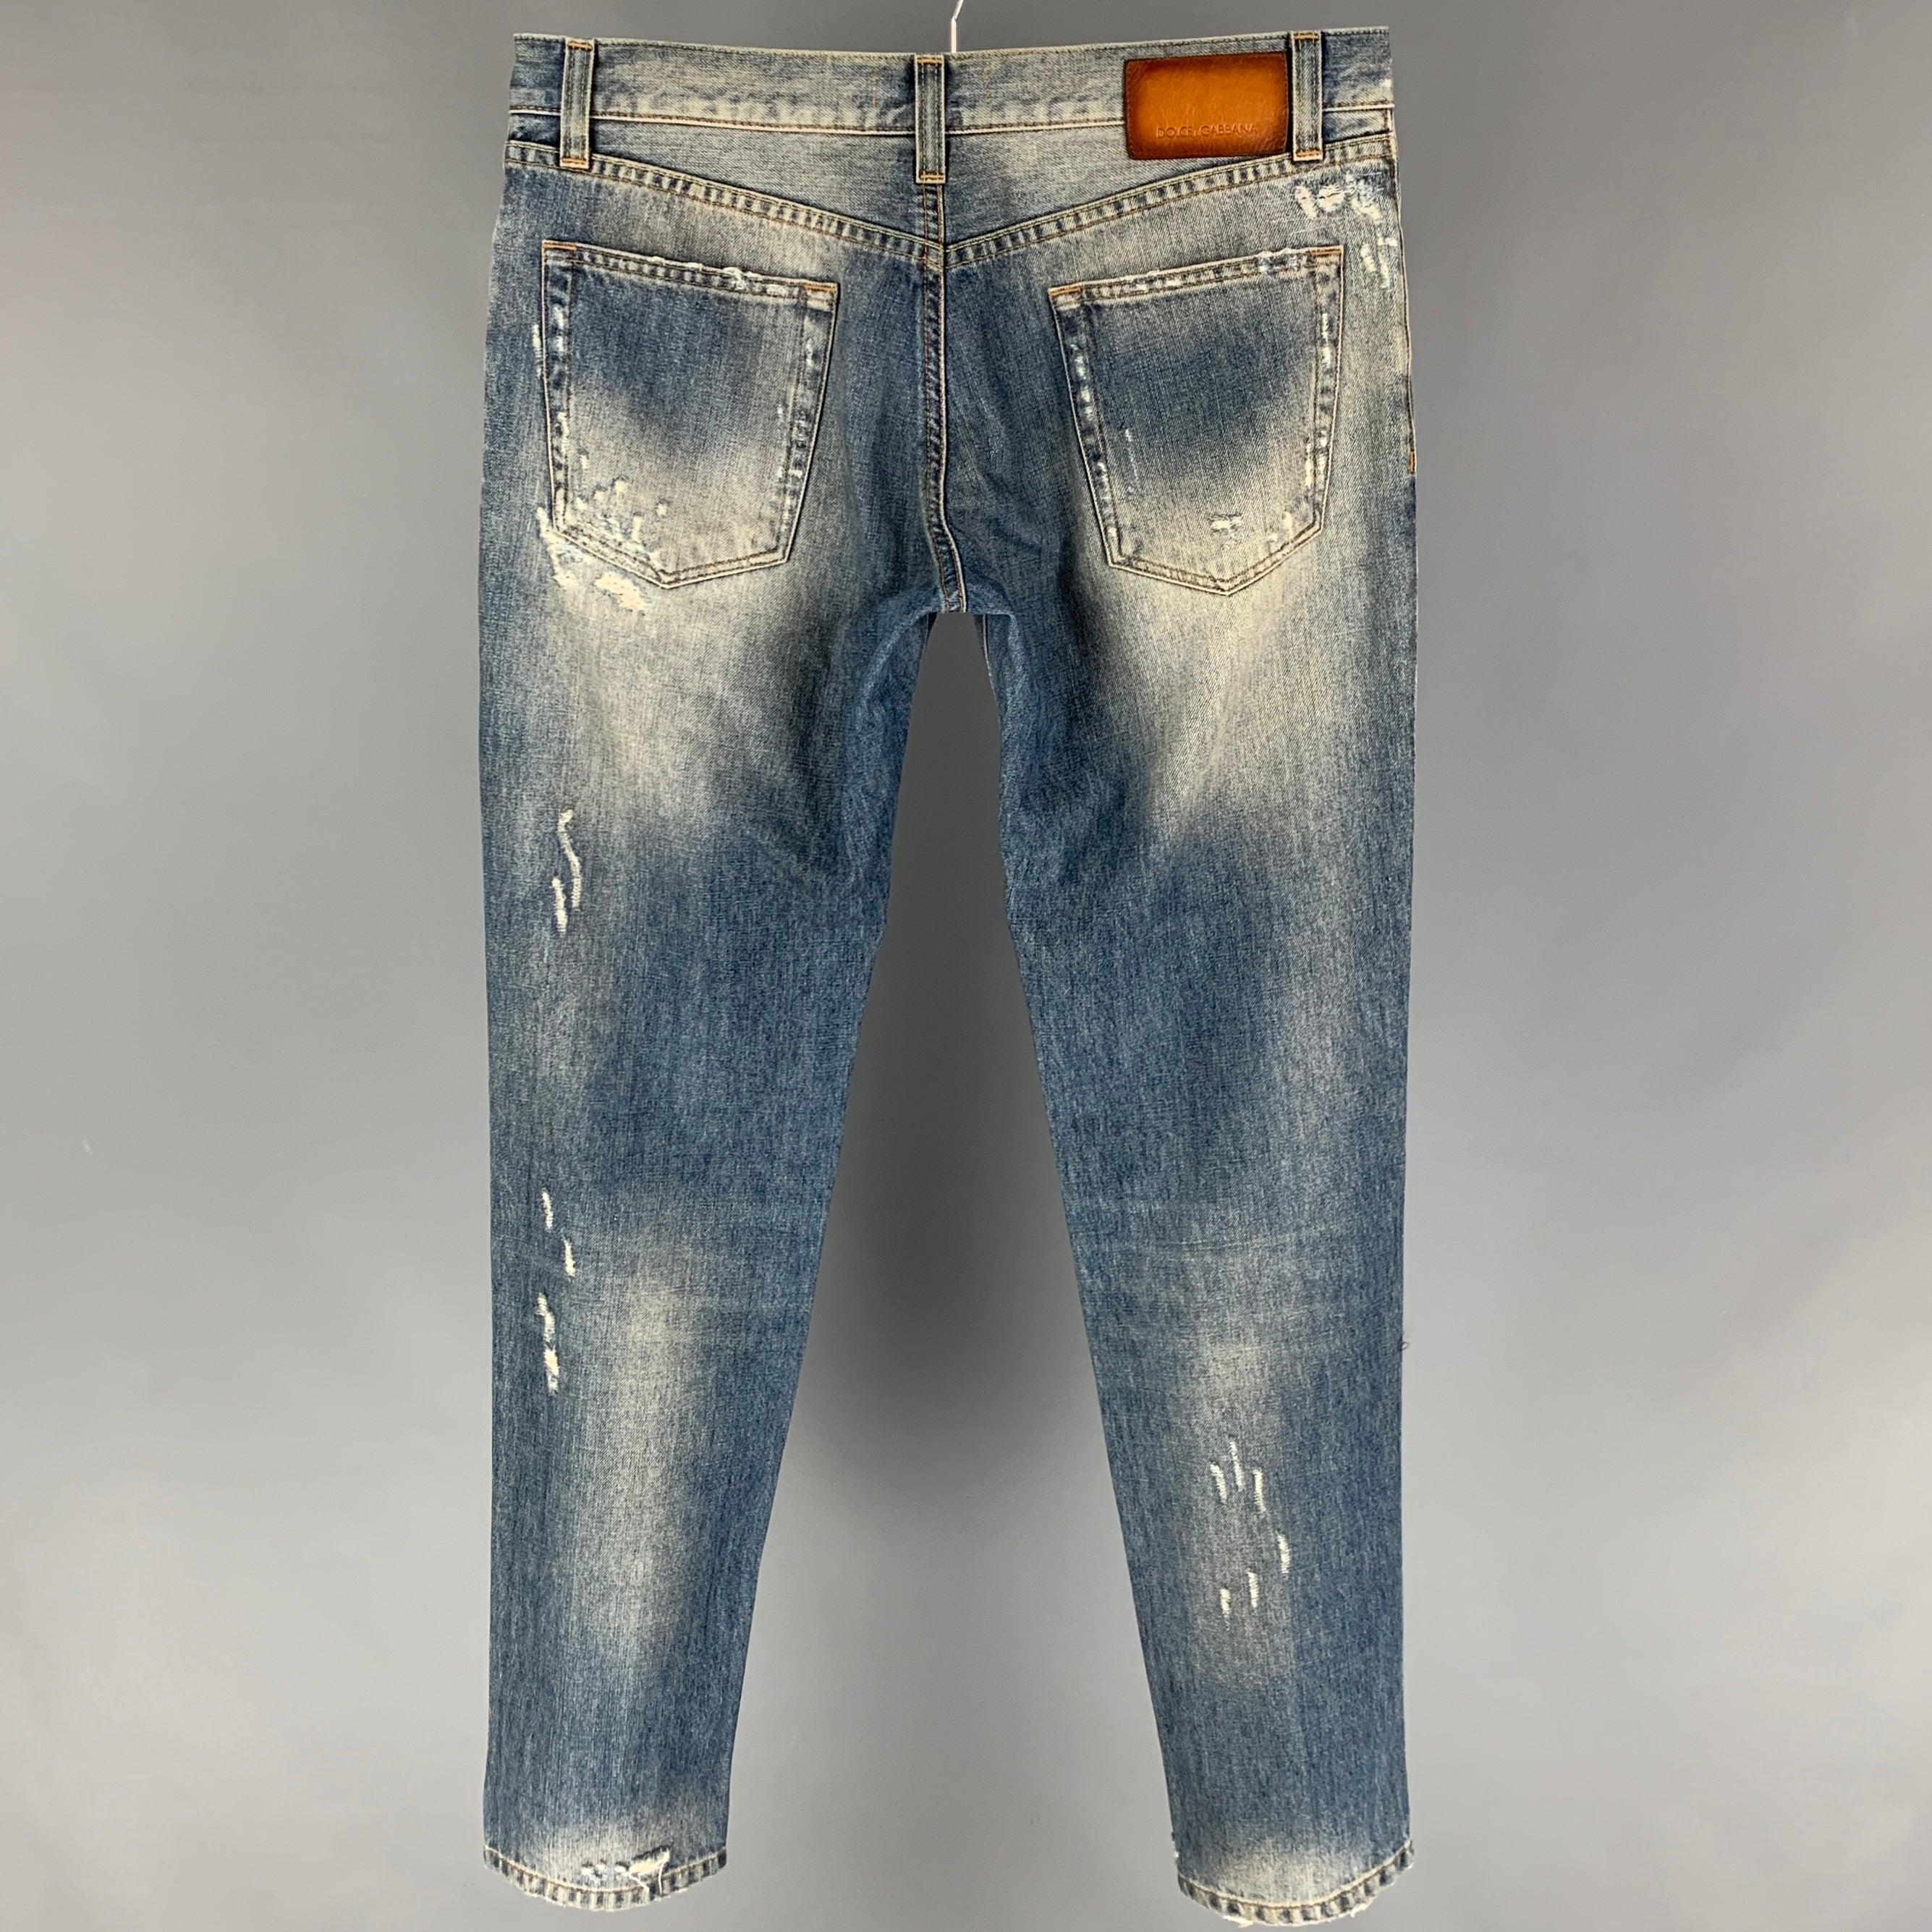 DOLCE & GABBANA jeans comes in a light blue cotton featuring distressed details, slim fit, contrast stitching, and a zip fly closure. Made in Italy.
 Very Good
 Pre-Owned Condition. 
 

 Marked:  48 
 

 Measurements: 
  Waist: 34 inches Rise: 9